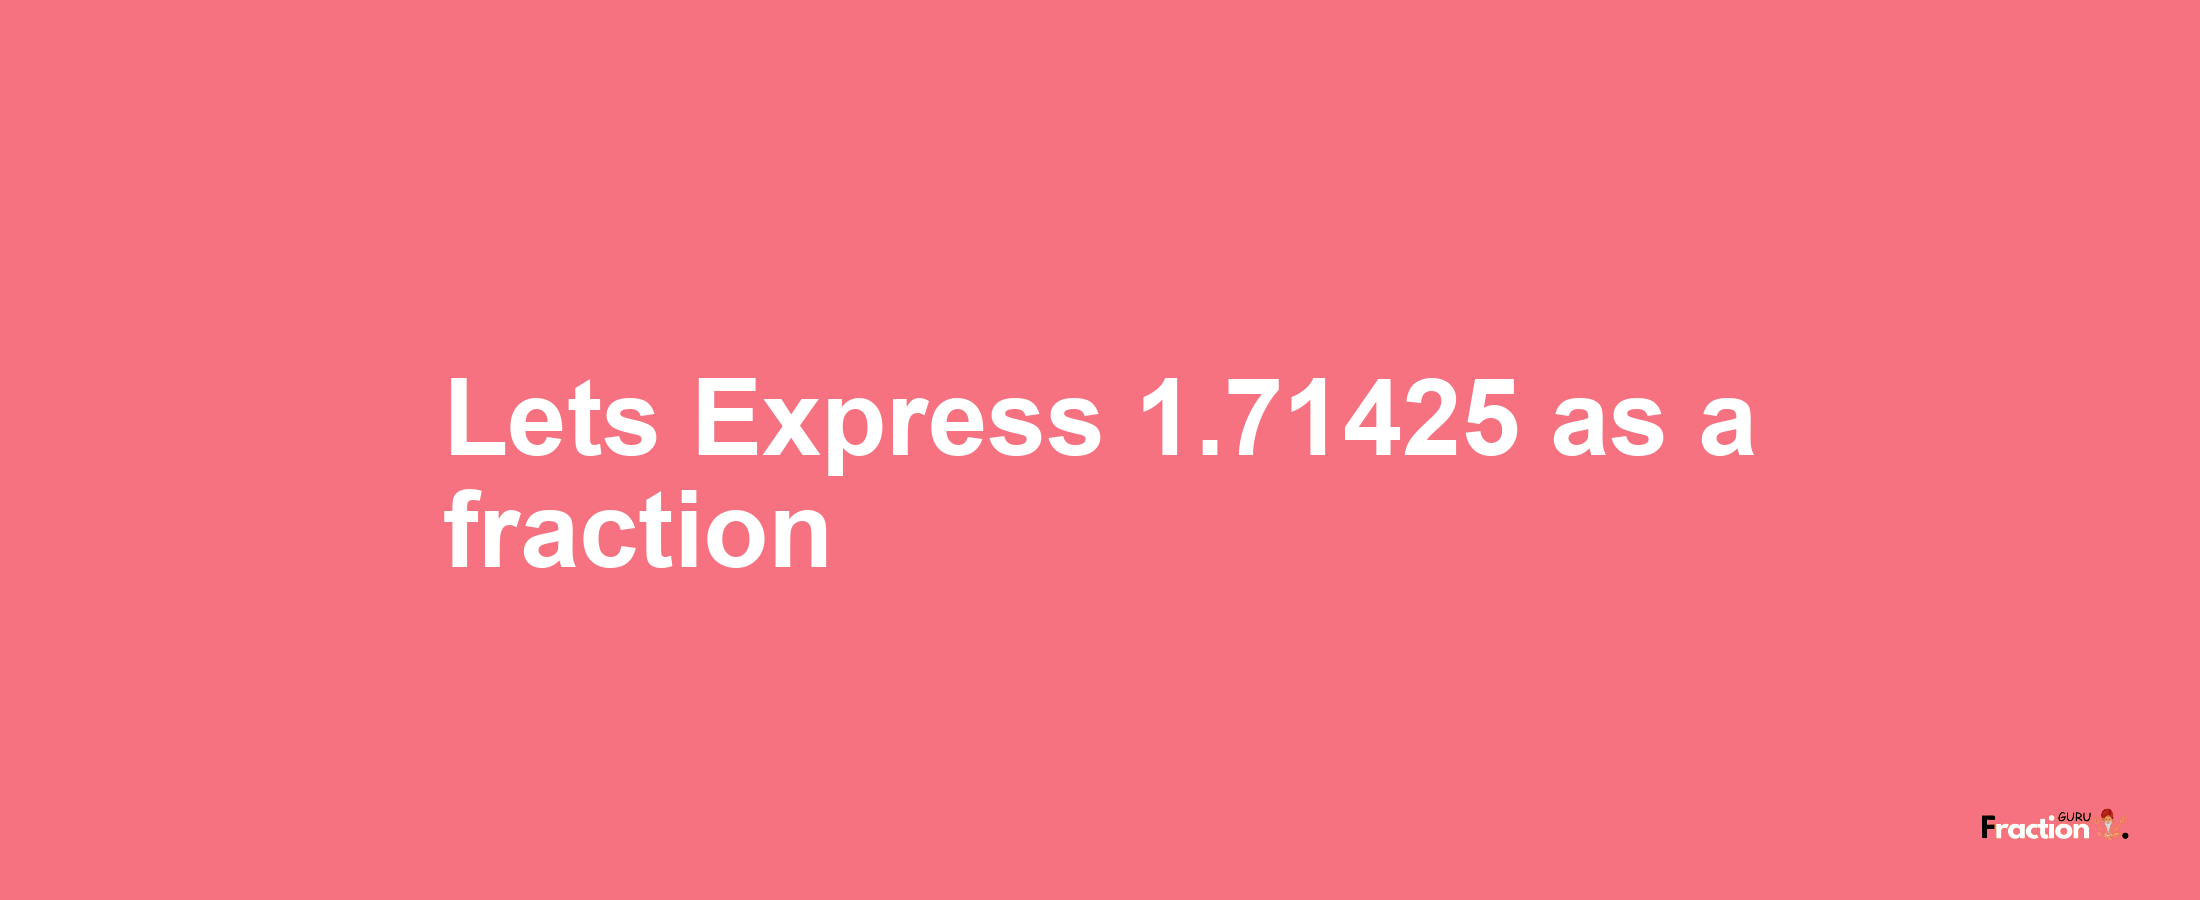 Lets Express 1.71425 as afraction